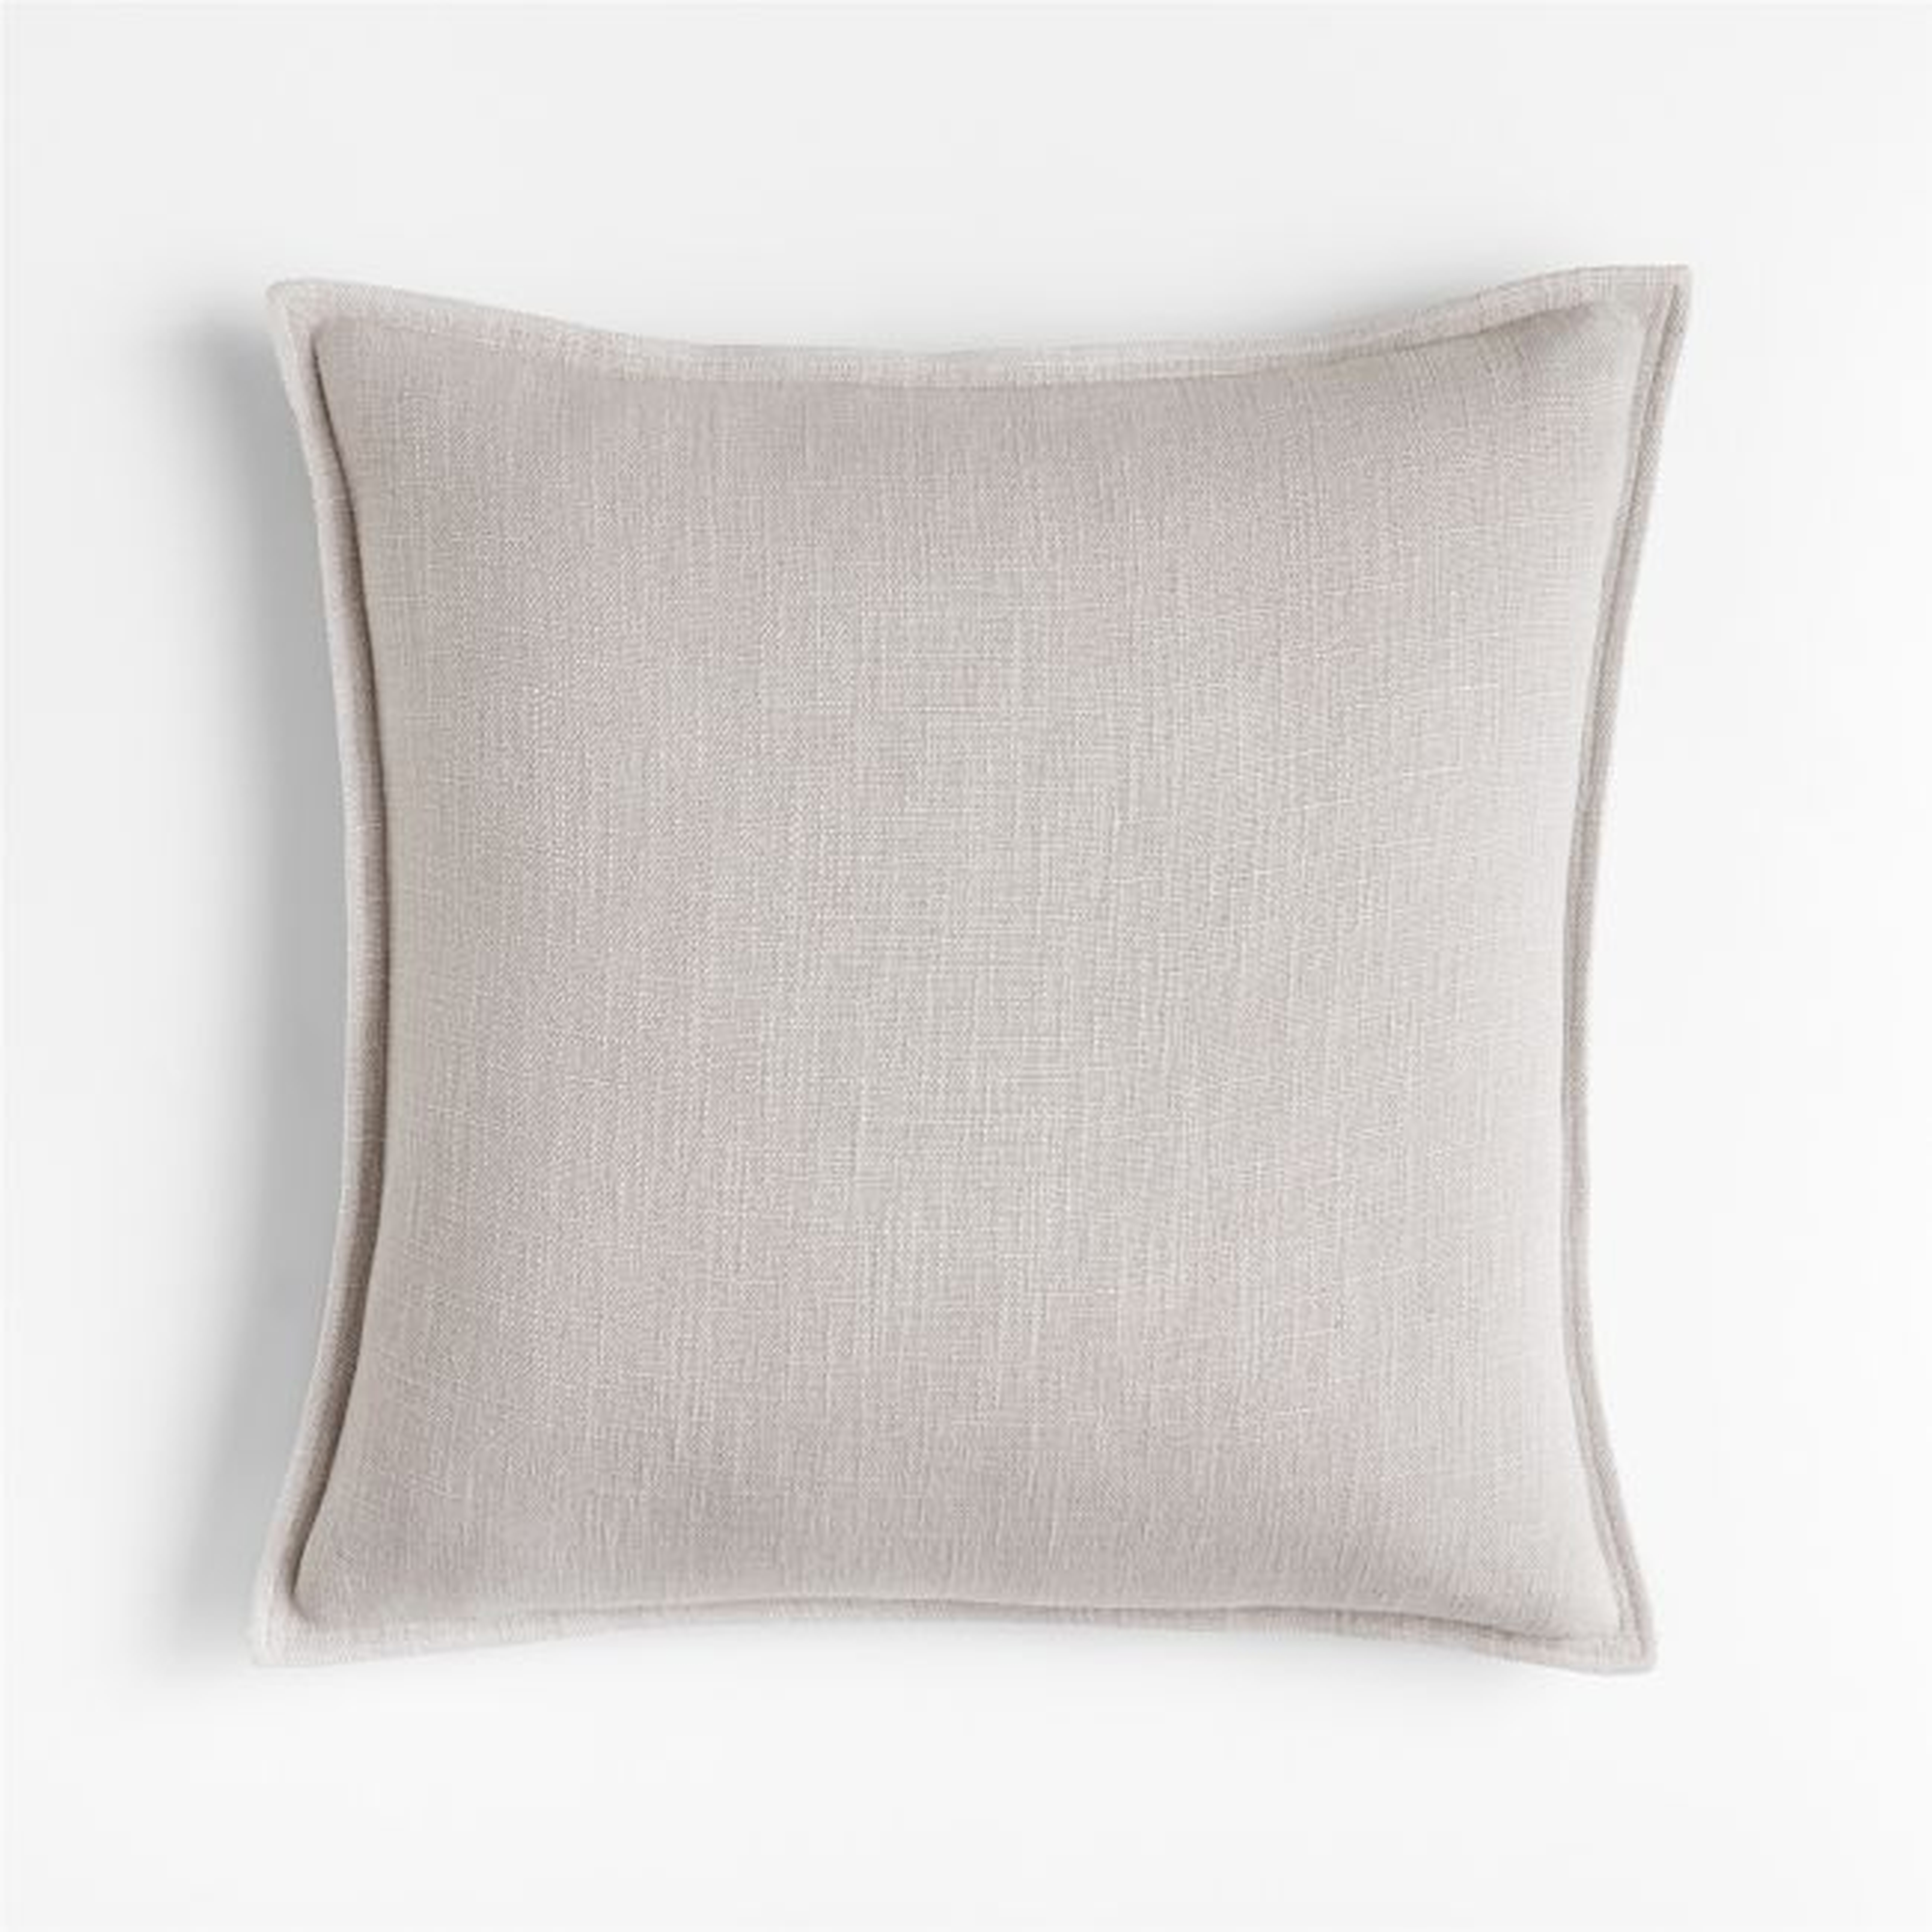 Pewter 20"x20" Laundered Linen Throw Pillow with Feather Insert - Crate and Barrel